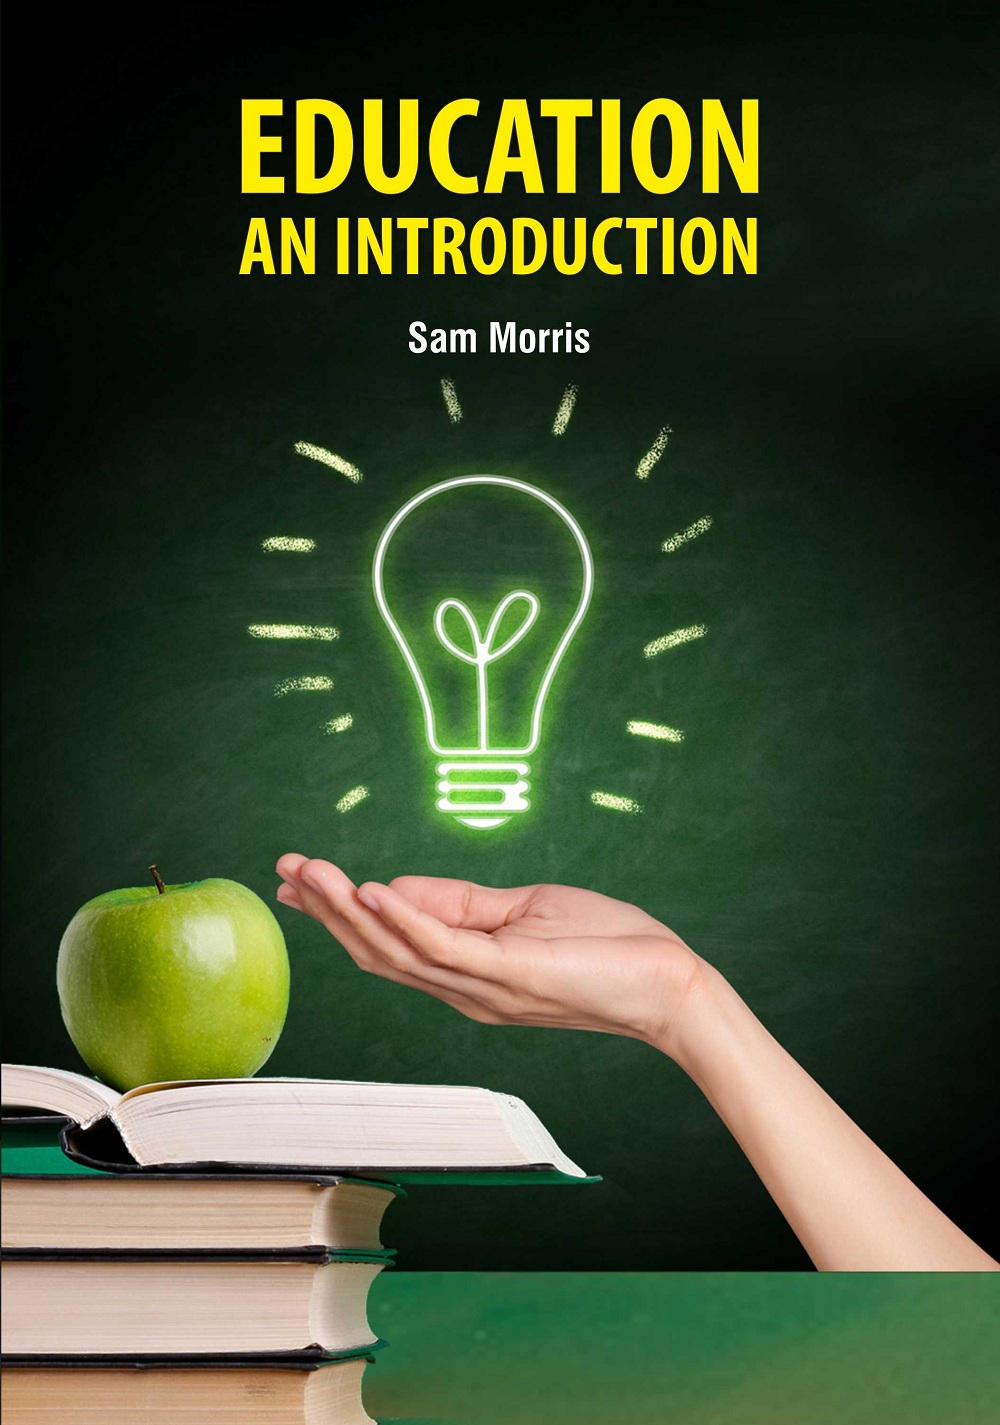 Education: An Introduction